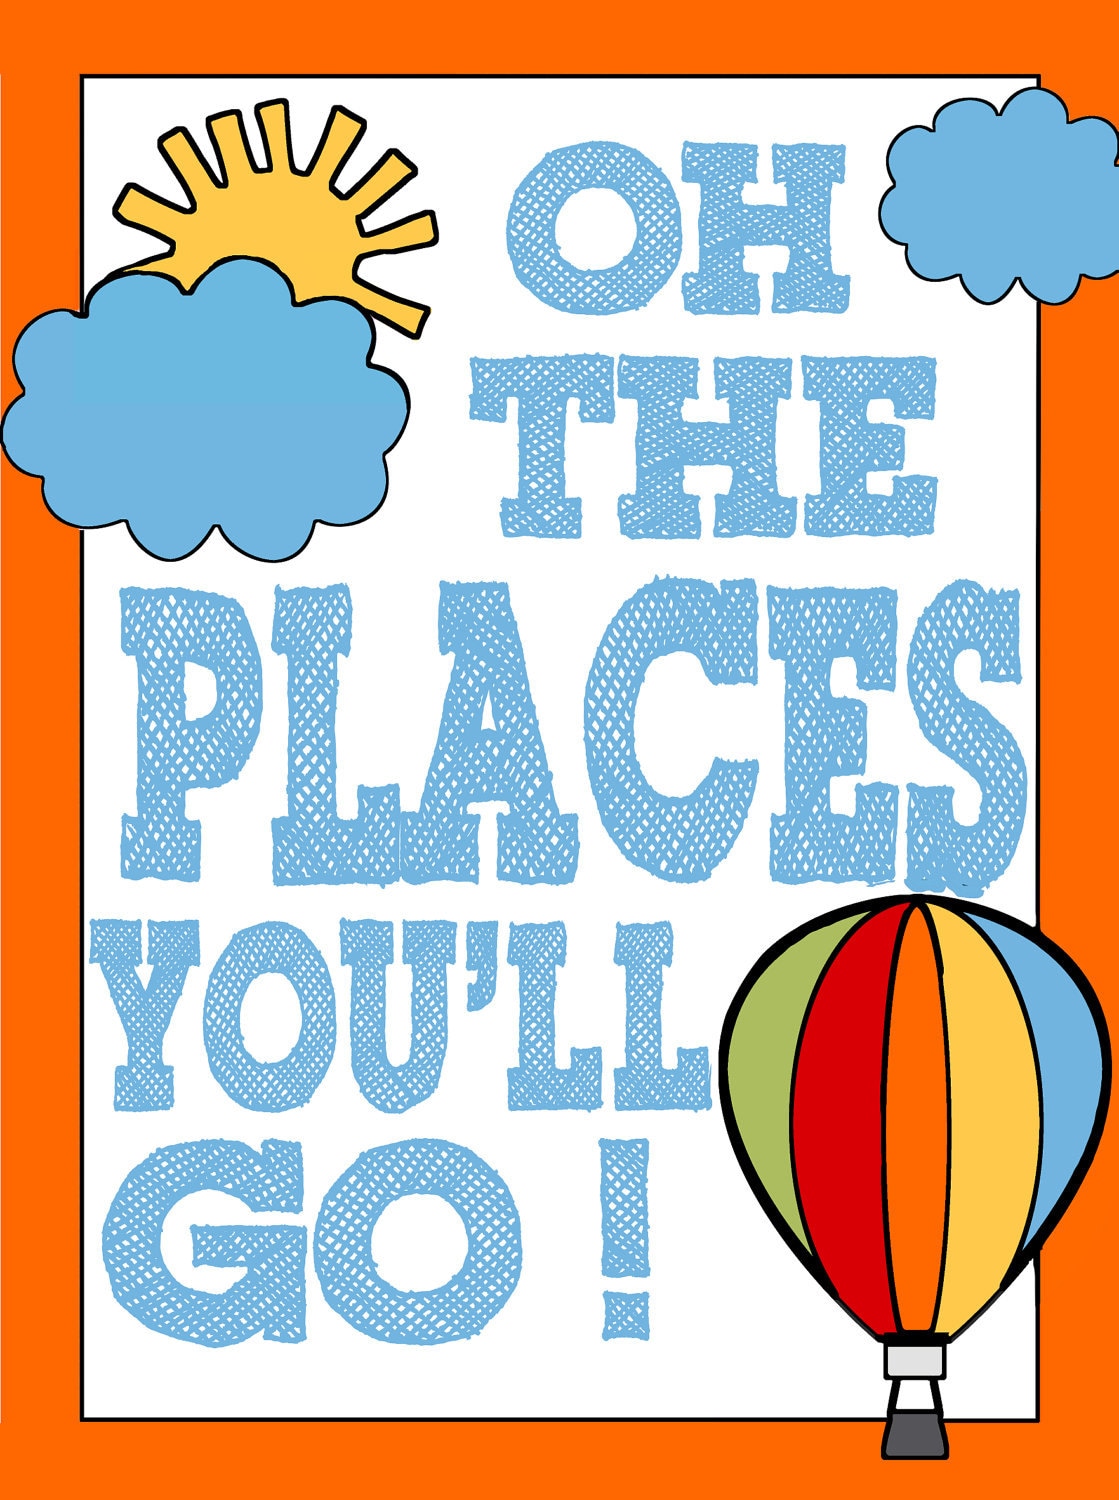 Dr. Seuss Print Oh the places you'll go... by Lexiphilia on Etsy